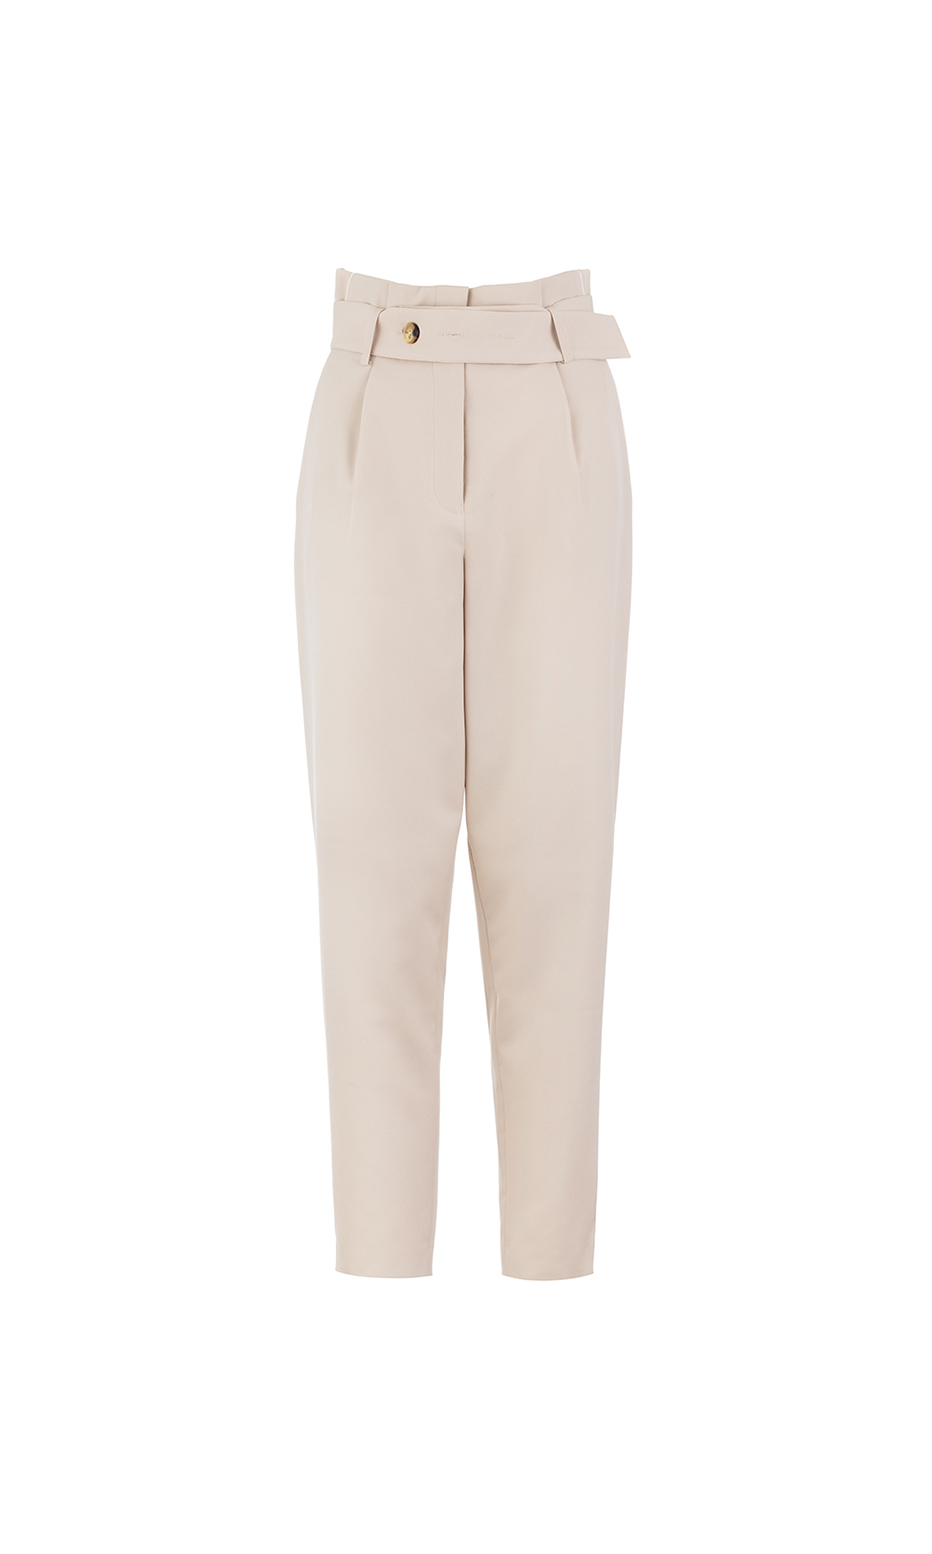 high waisted beige trousers	